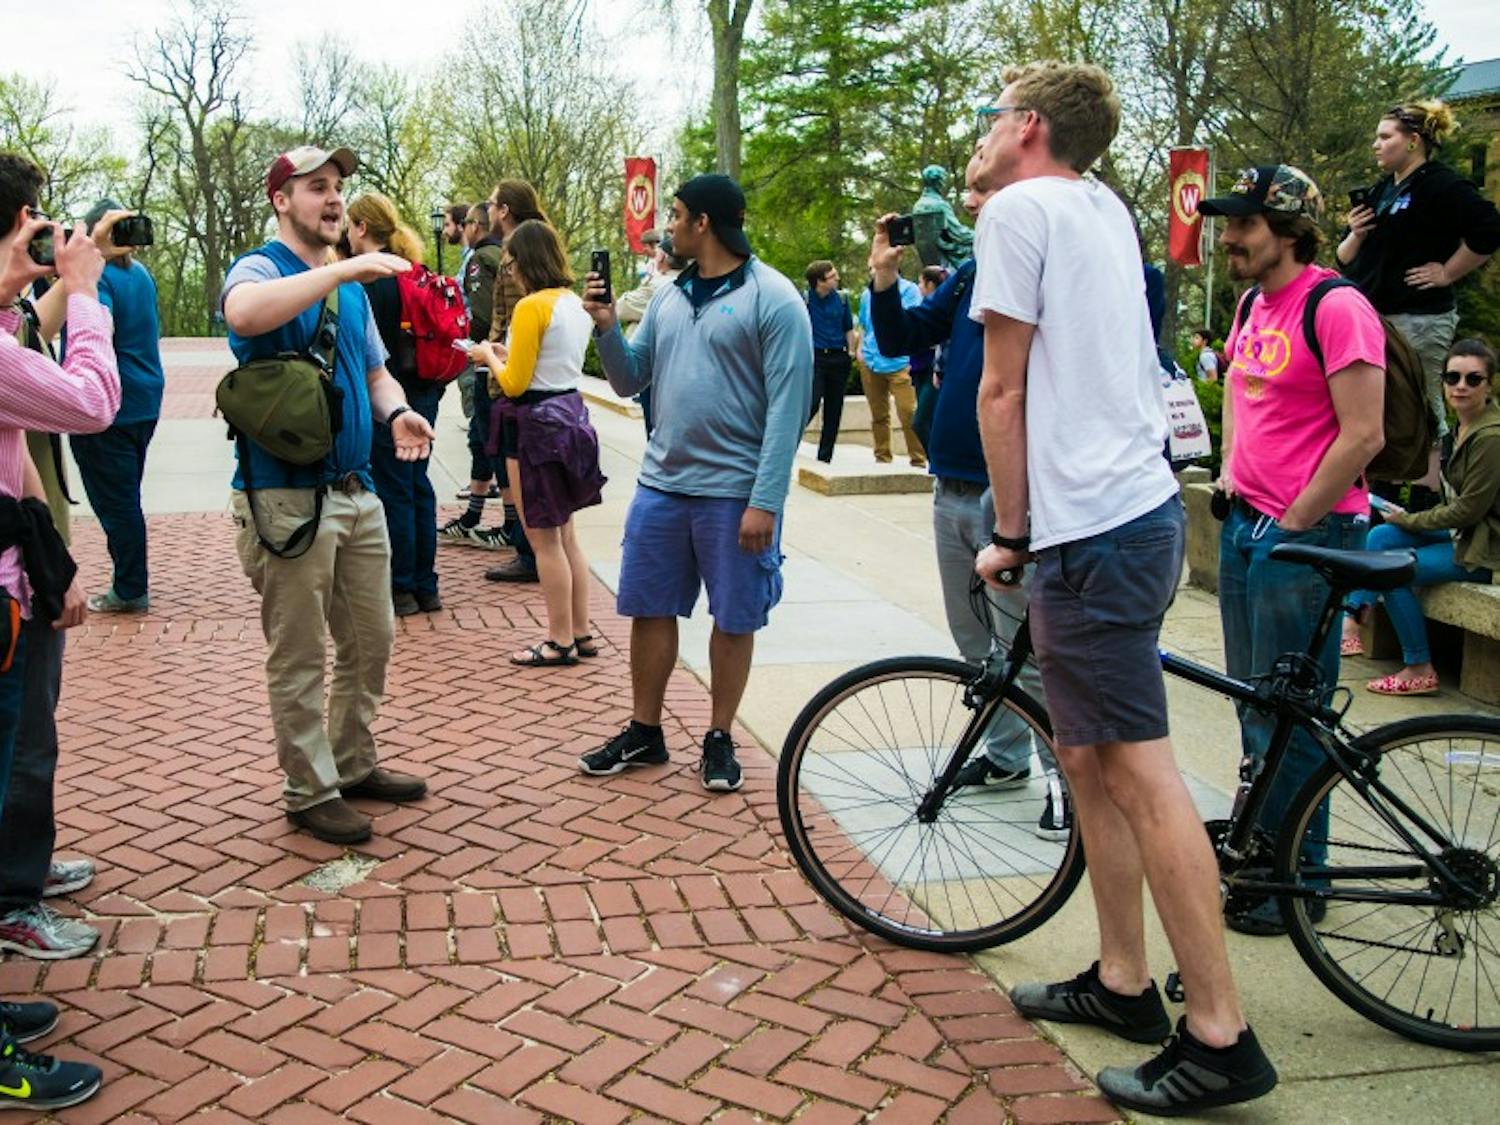 Two conservative speakers, former Breitbart editor Ben Shapiro and editor-in-chief of Forbes Media&nbsp;Steve Forbes, were subjected to student protests at UW-Madison this year.&nbsp;